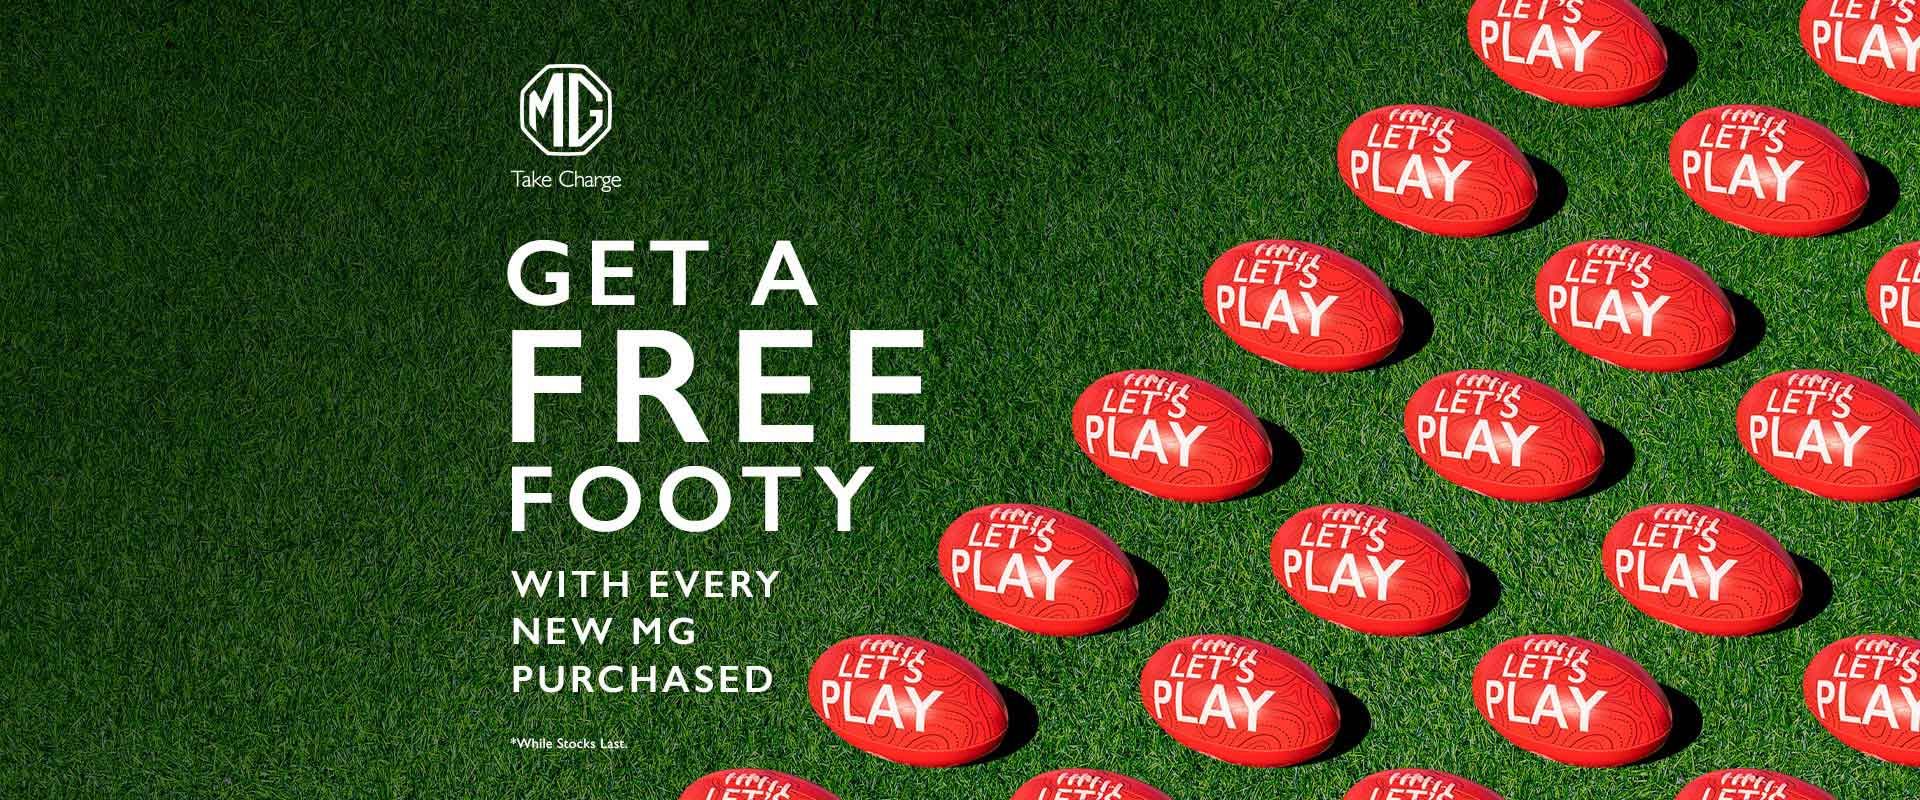 Get a Free Footy with every new MG purchased